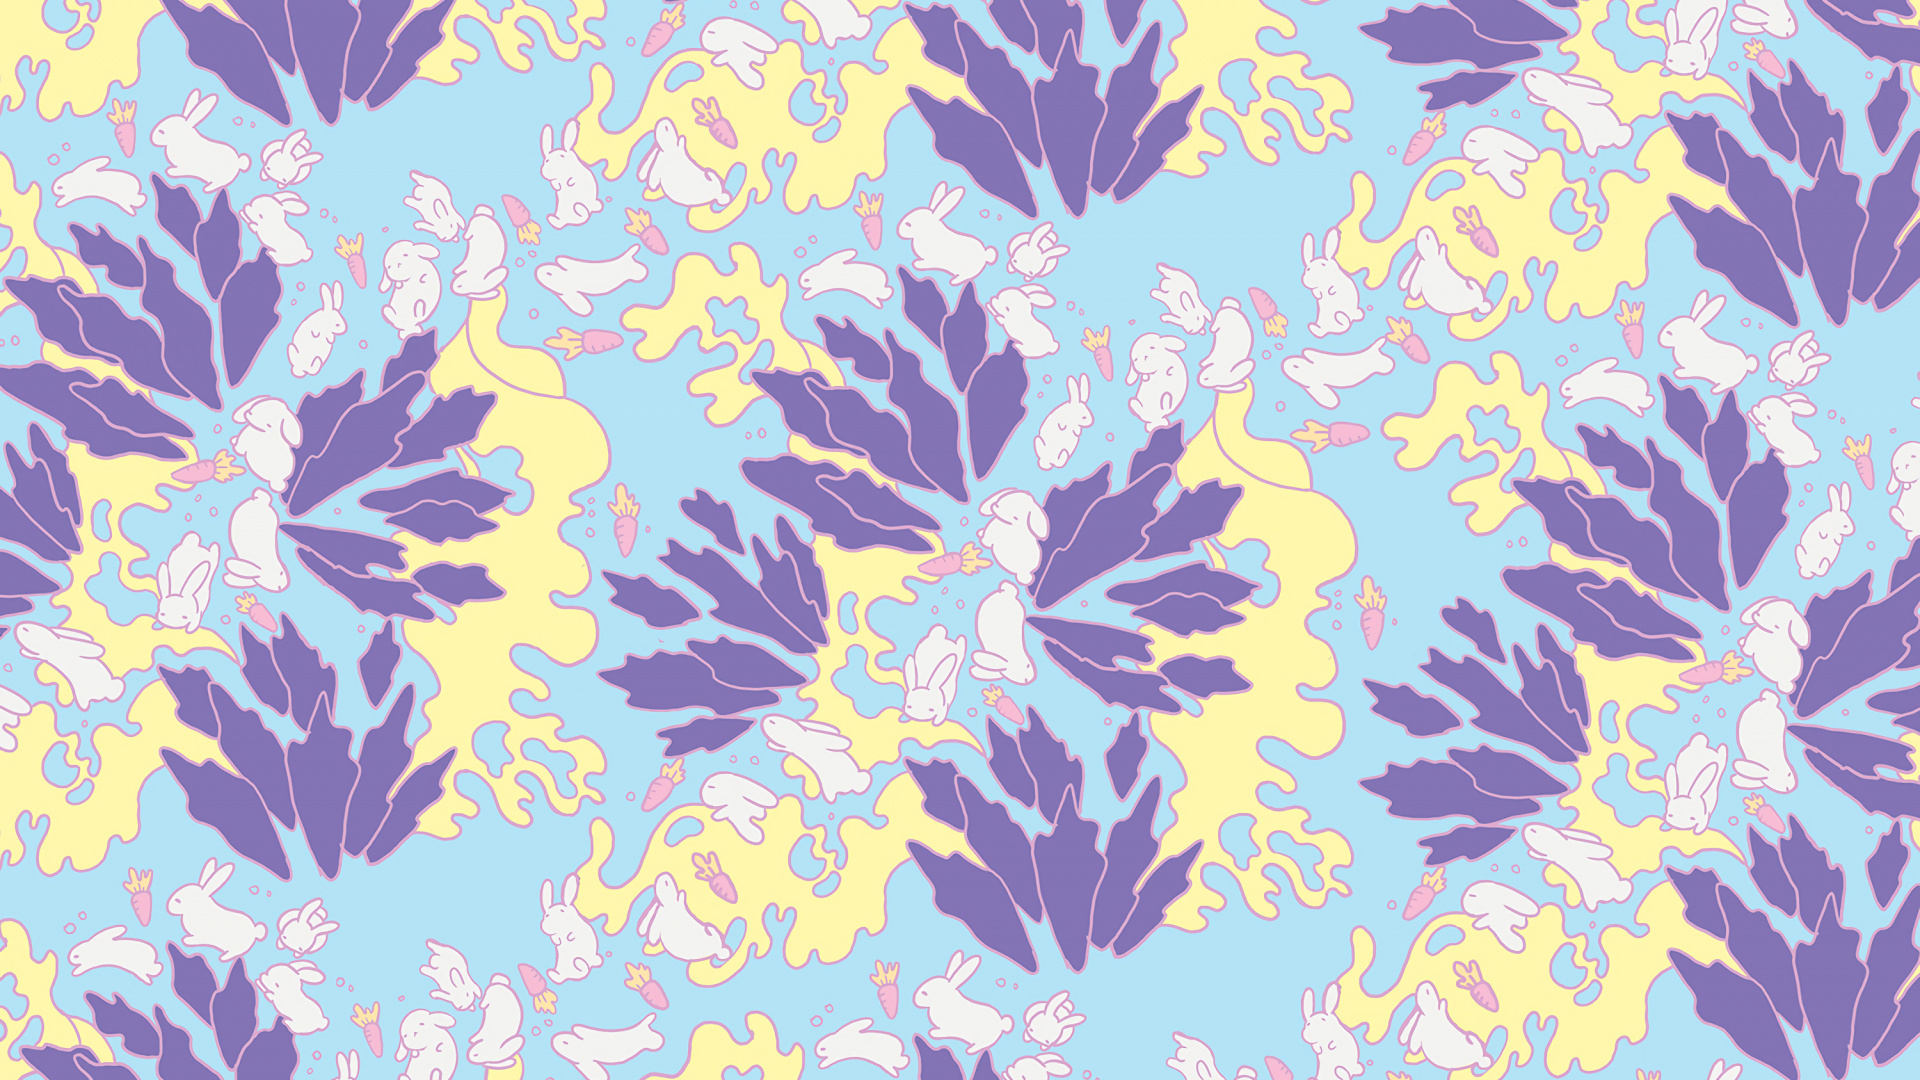 Blue Yellow and Black Floral Textile. Wallpaper in 1920x1080 Resolution